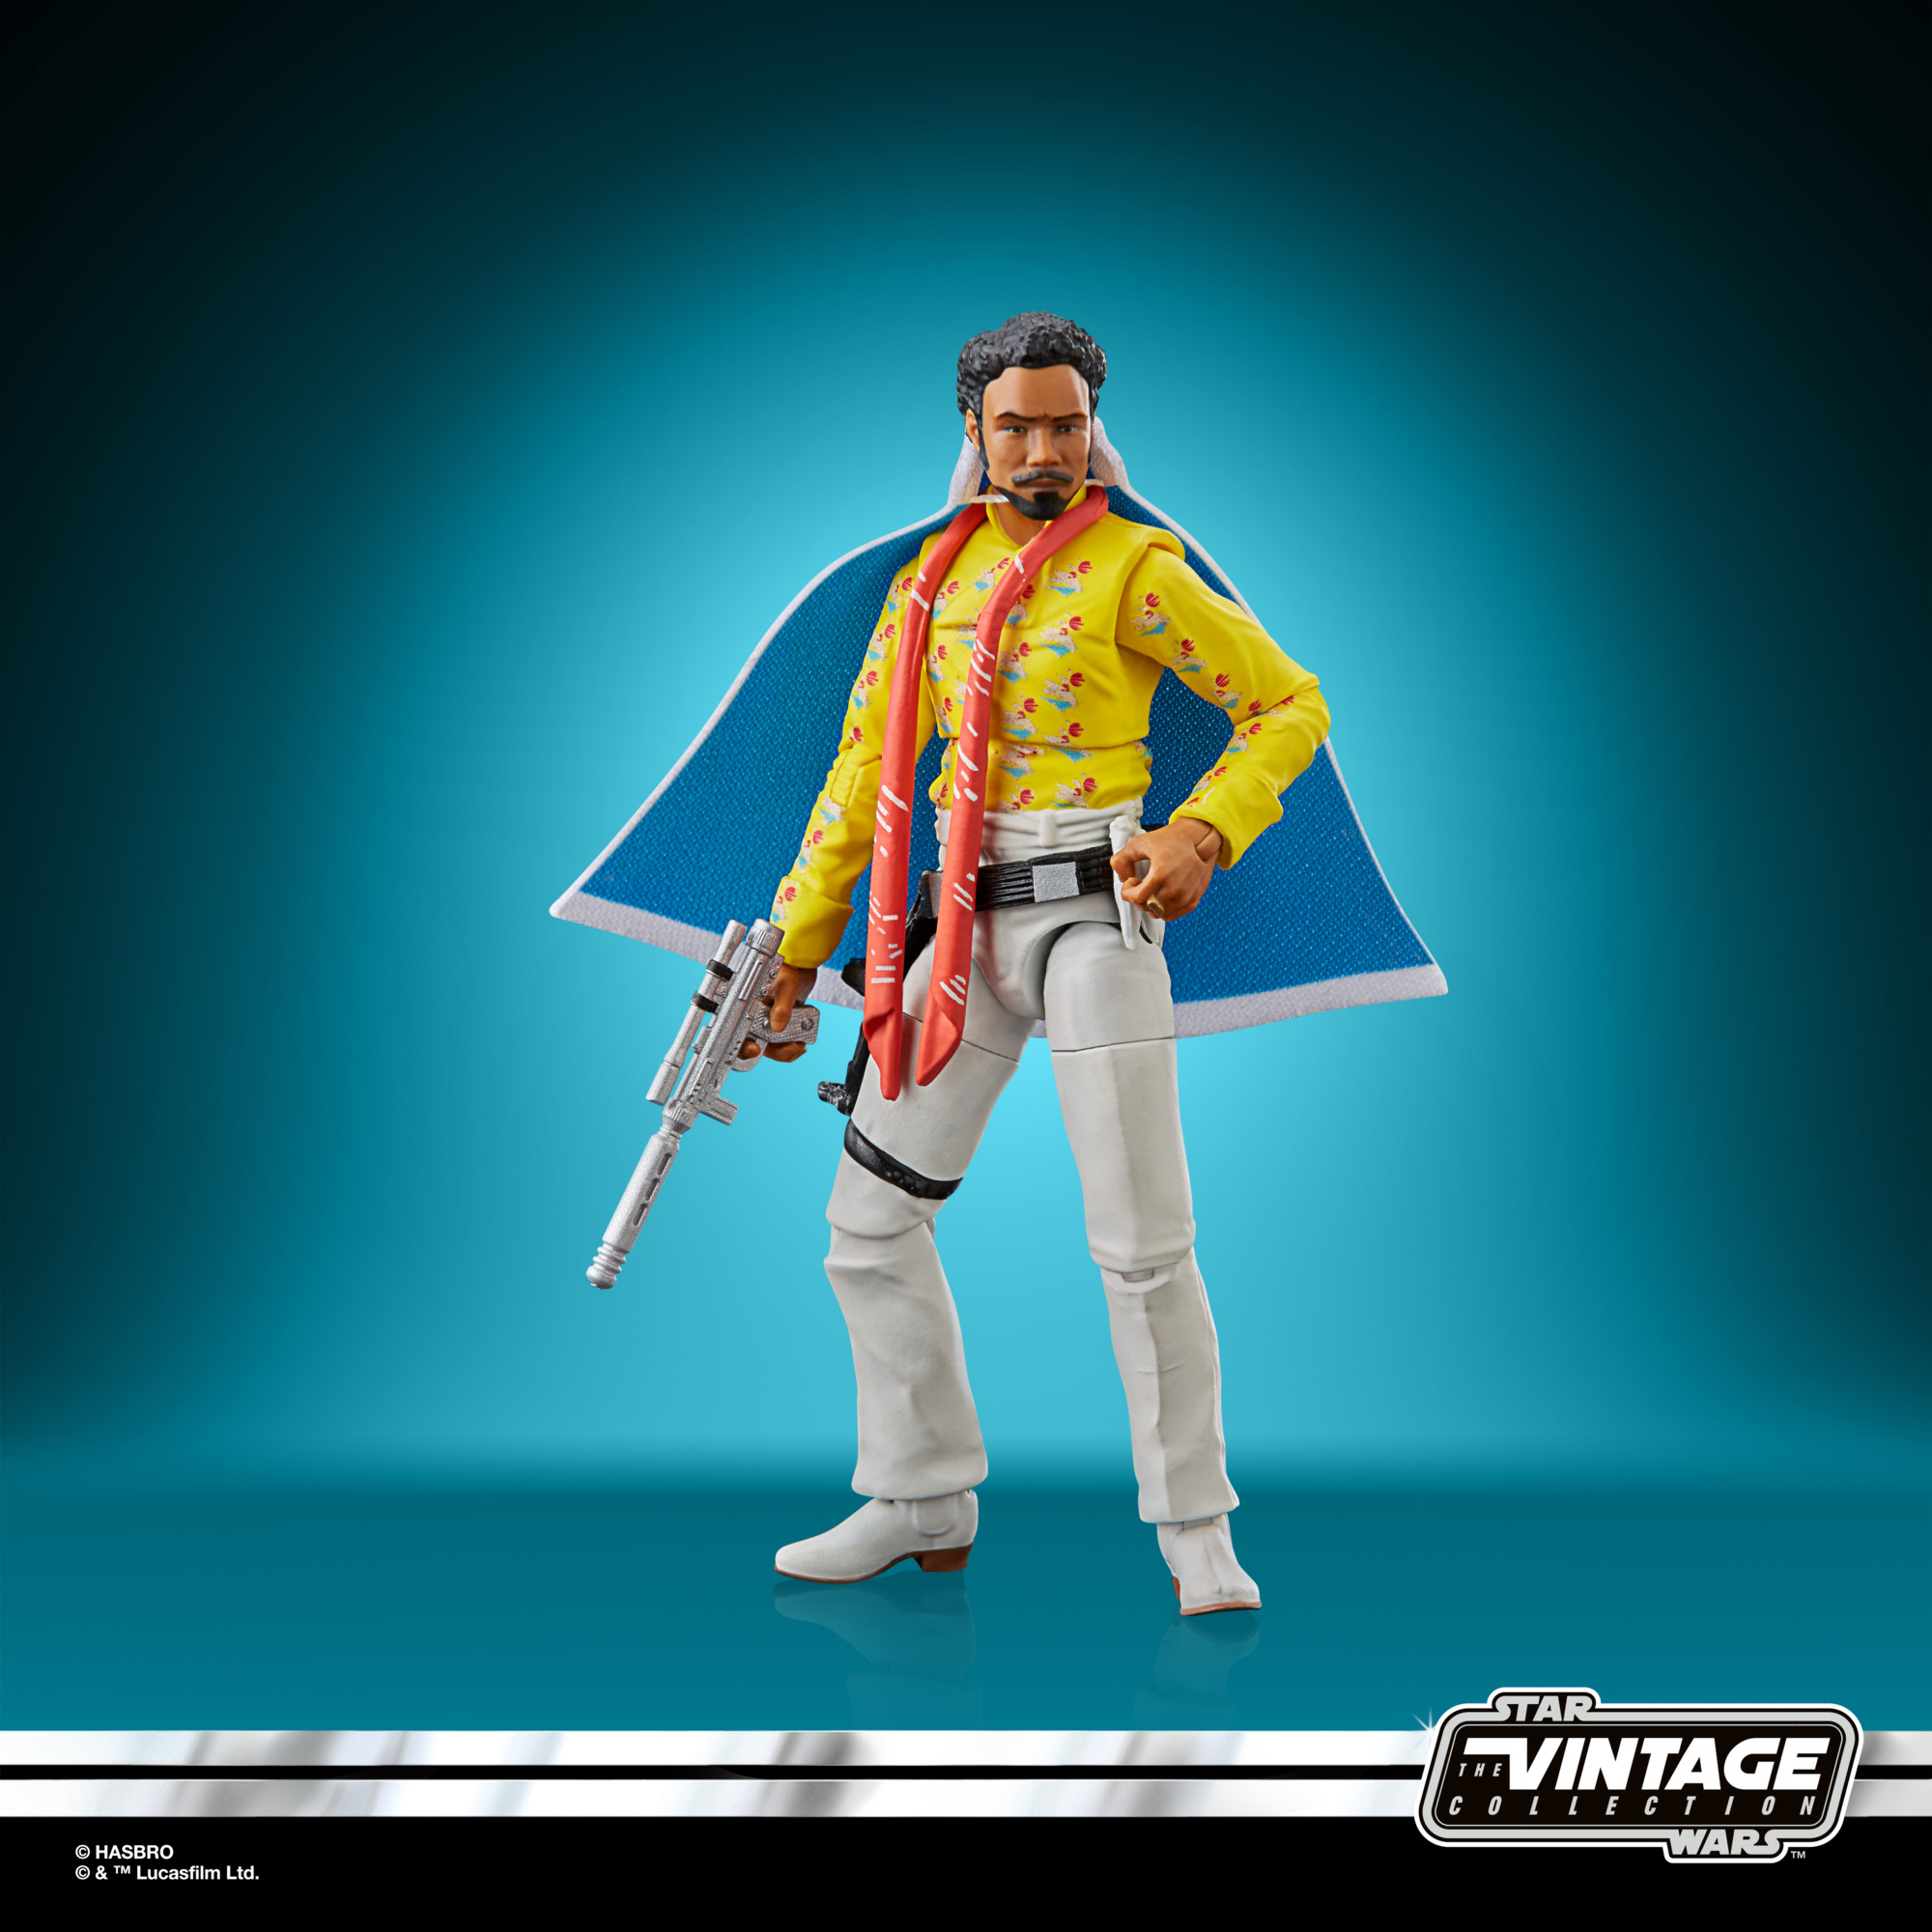 Star Wars The Vintage Collection Gaming Greats Lando Calrissian (Star Wars Battlefront II) F55575L00 5010993967810